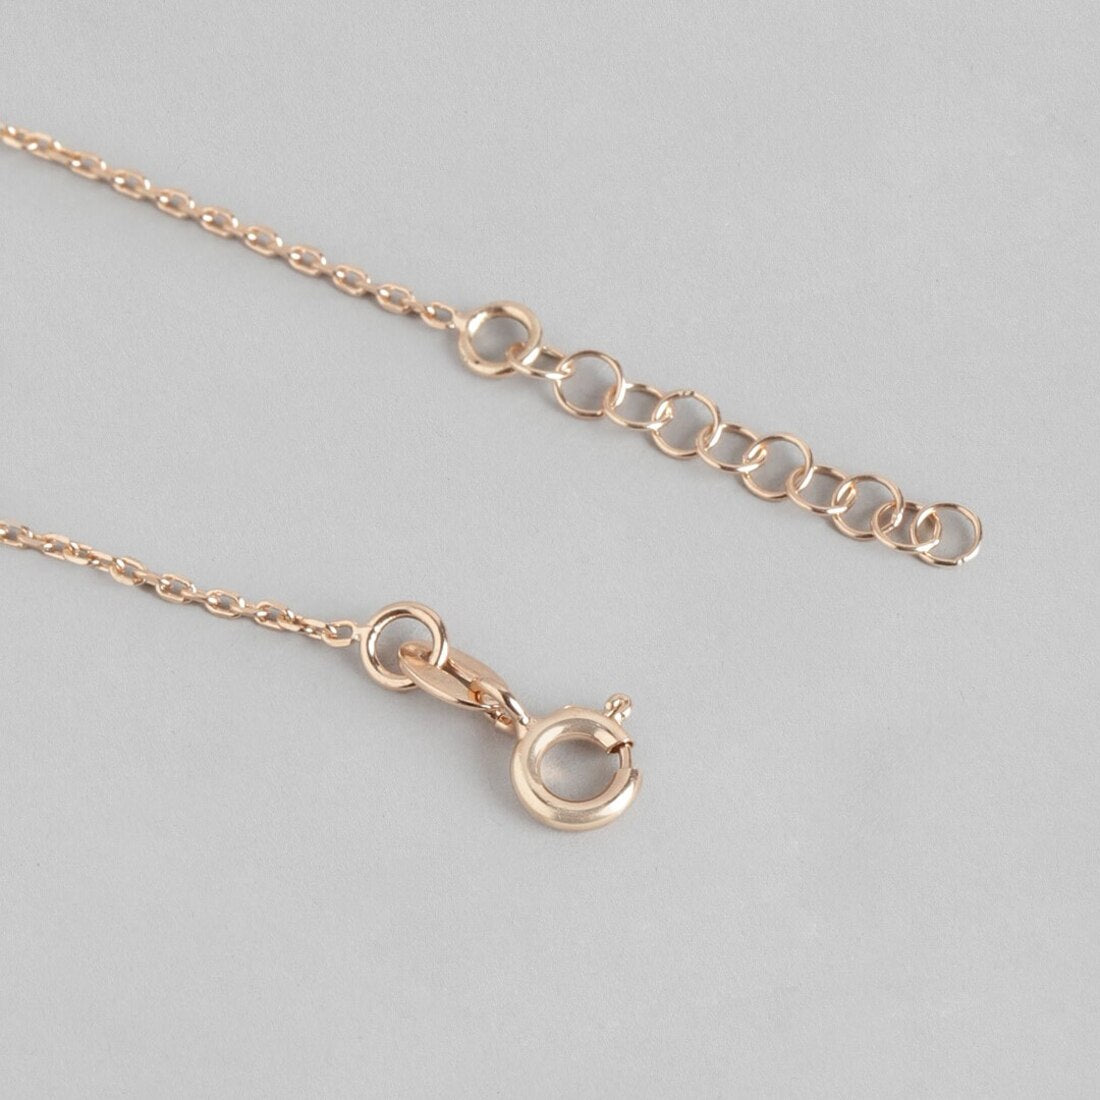 The Moon 925 Sterling Silver Anklet in Rose Gold